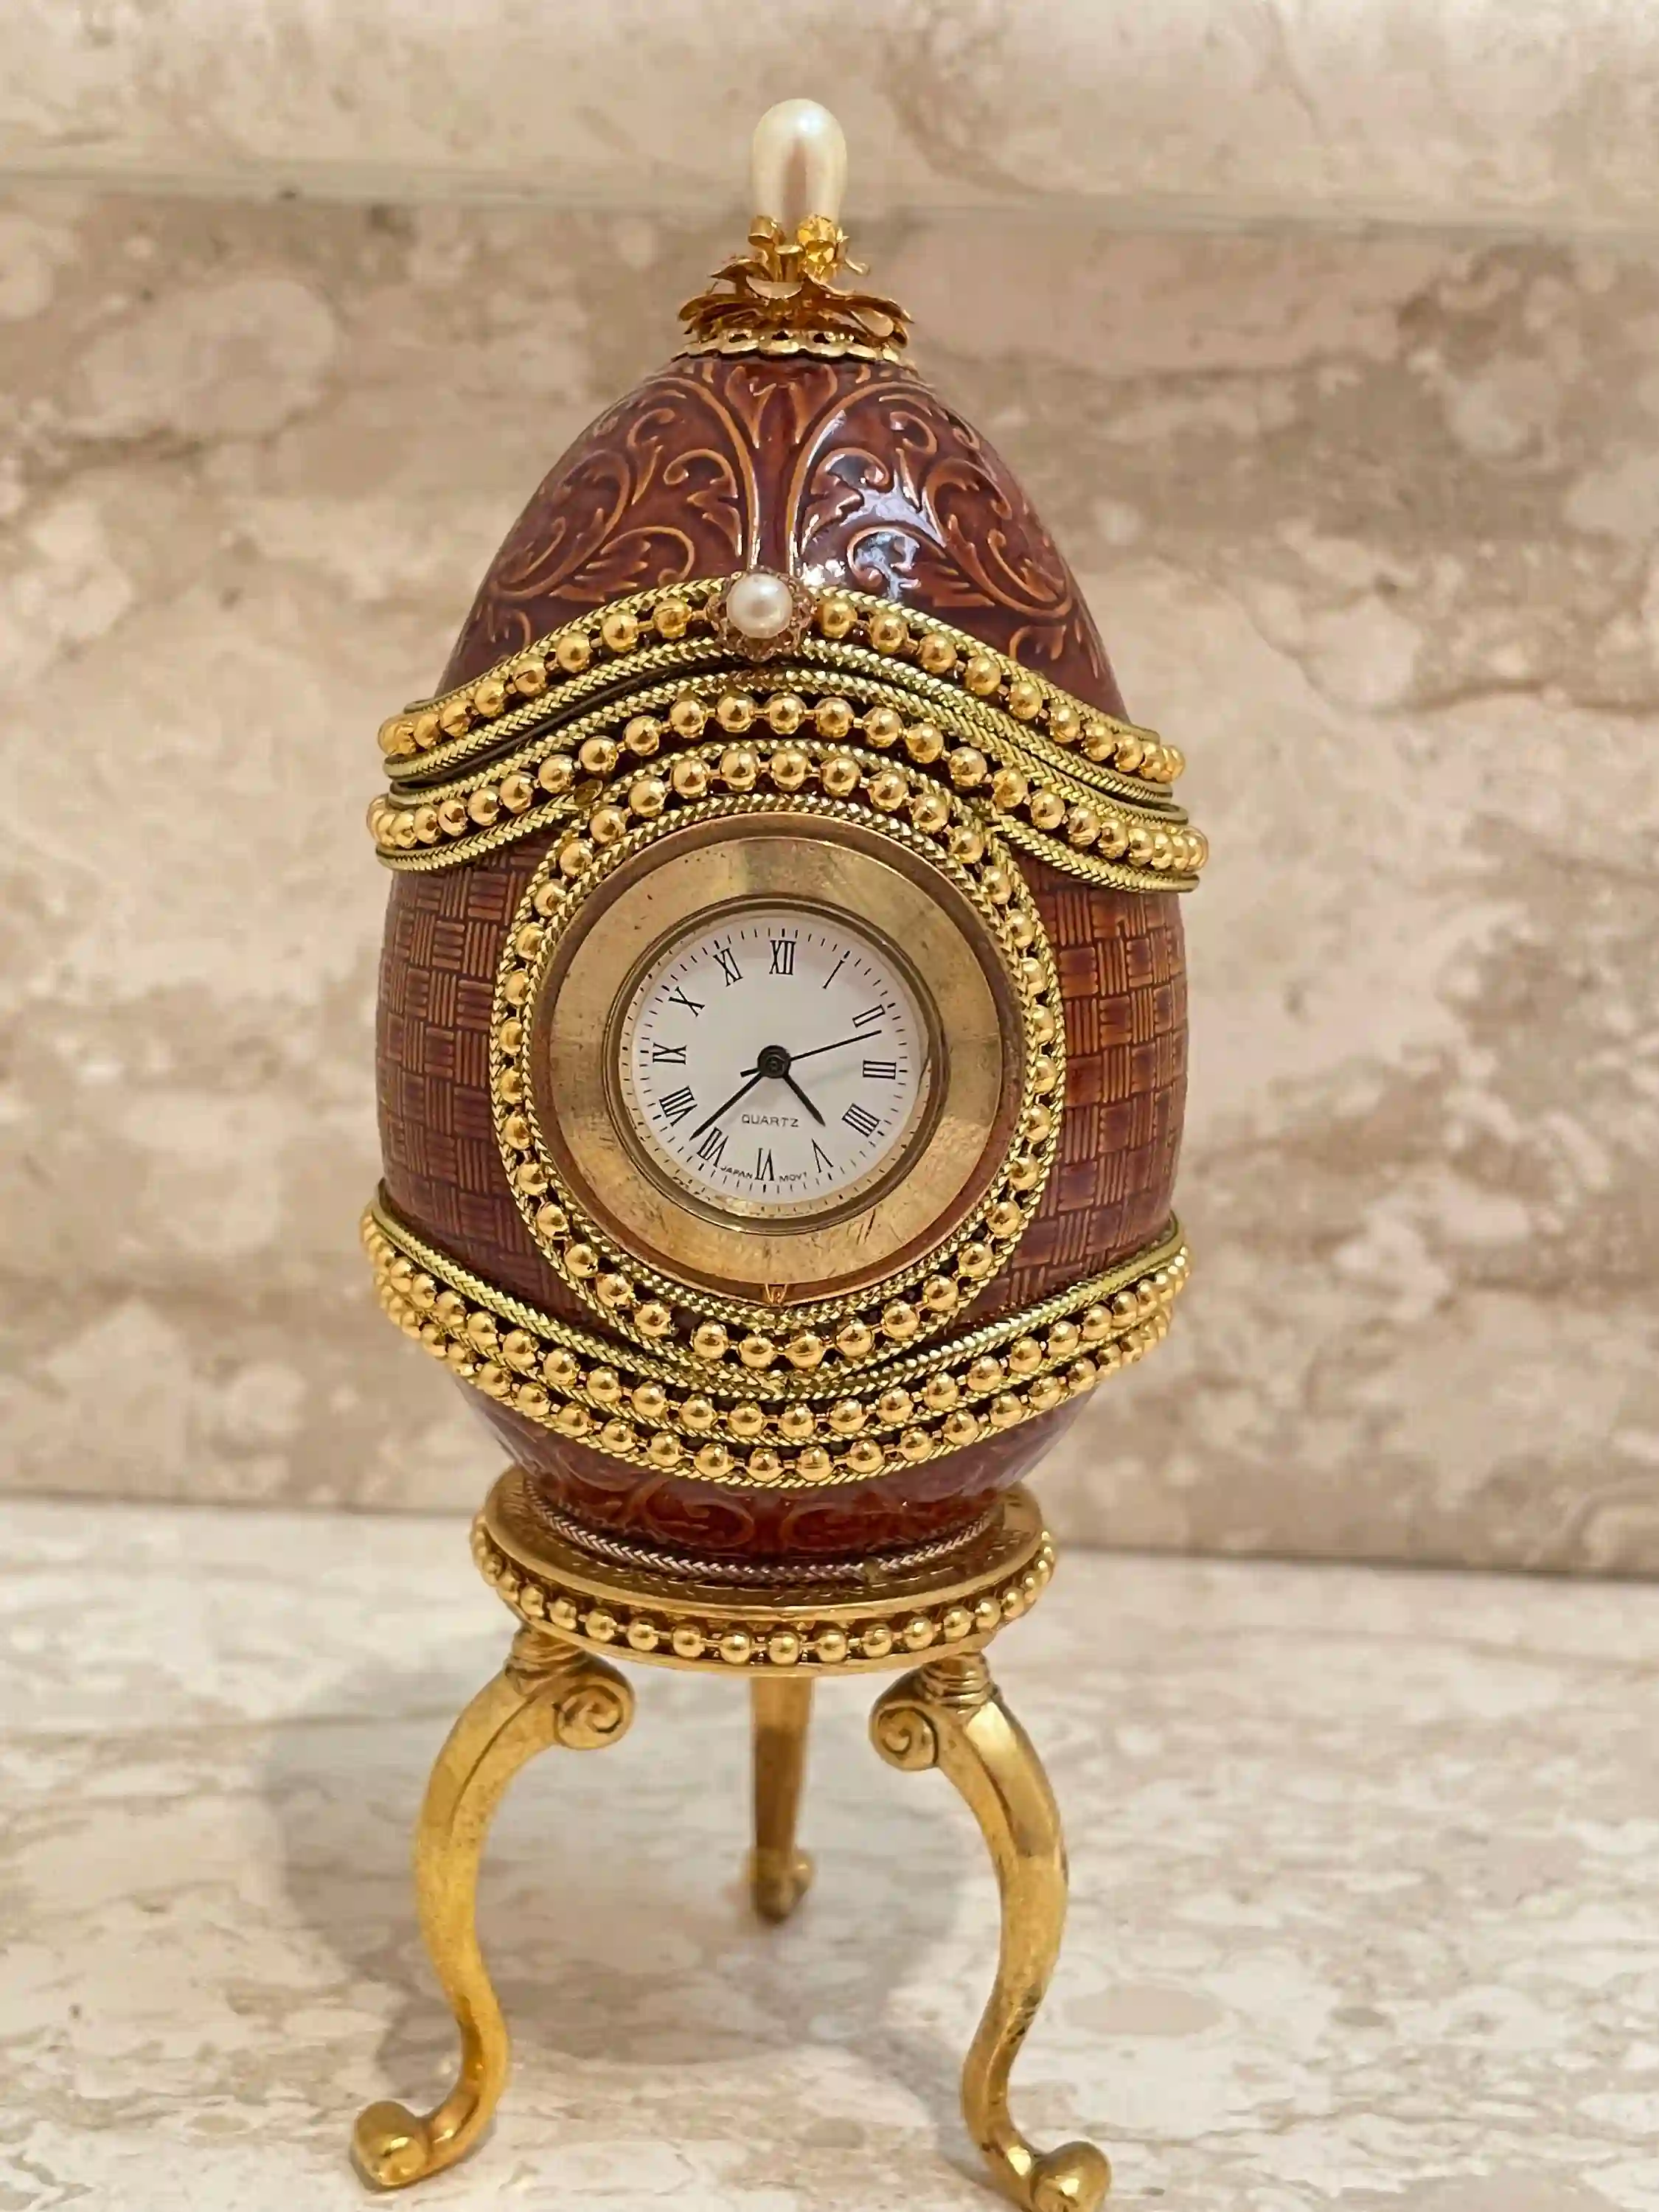 1992 Vintage Clock Faberge egg style Antique Egg for Father Inlaw Faberge egg 24k GOLD HandCarved Natural Faberge egg Christmas Gift for him 